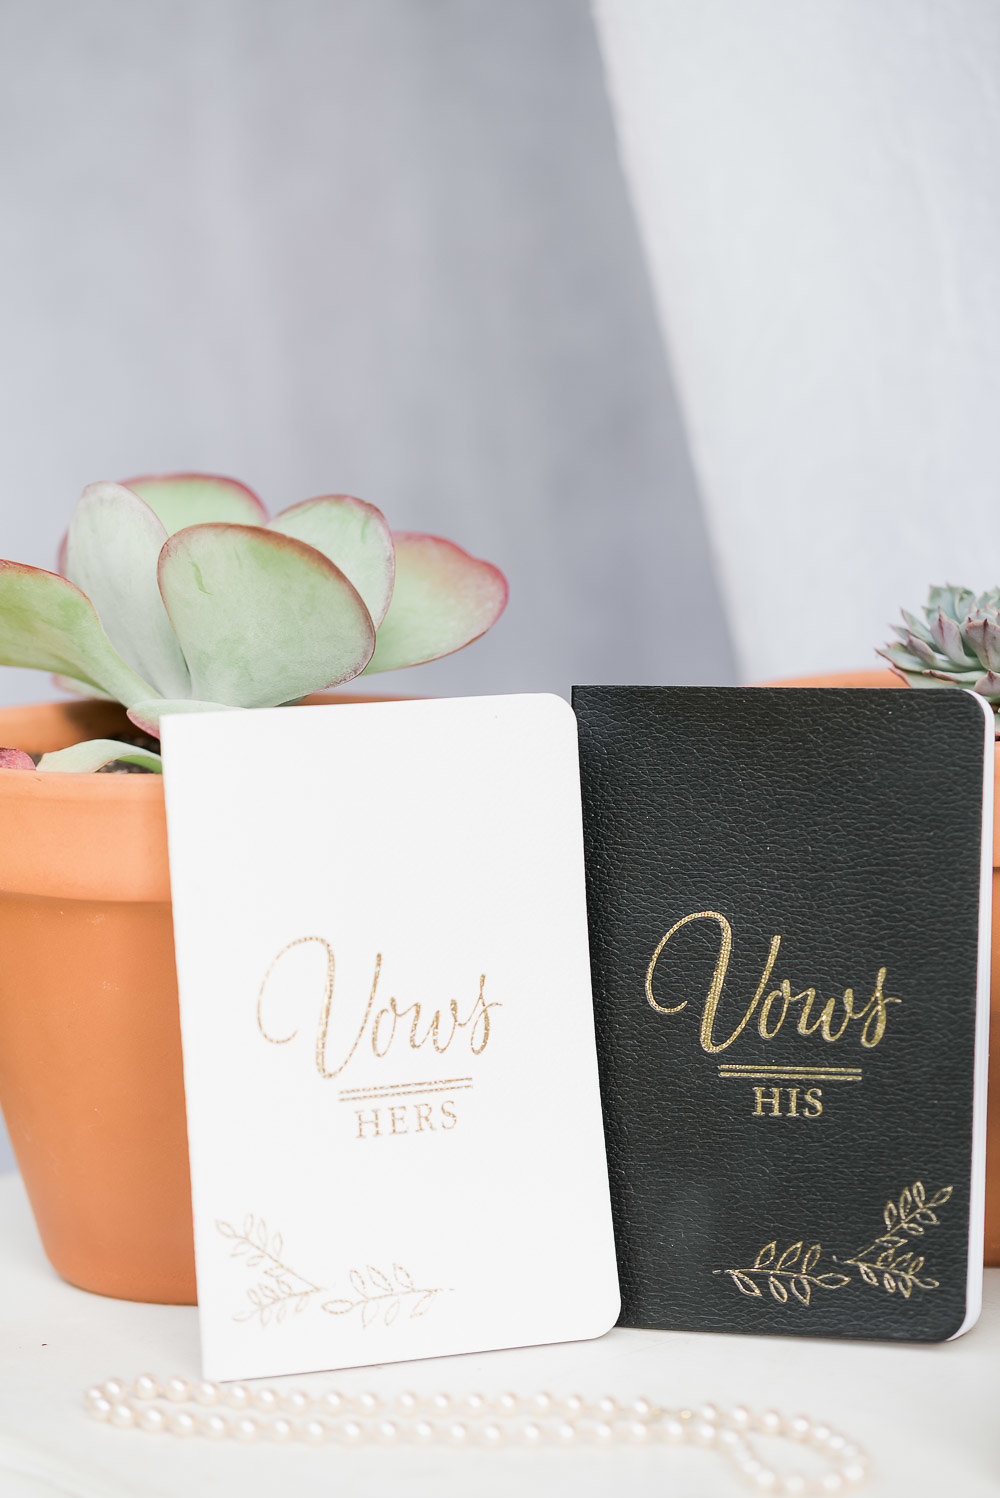 A white wedding vows book on the left and a black wedding vows book on the right